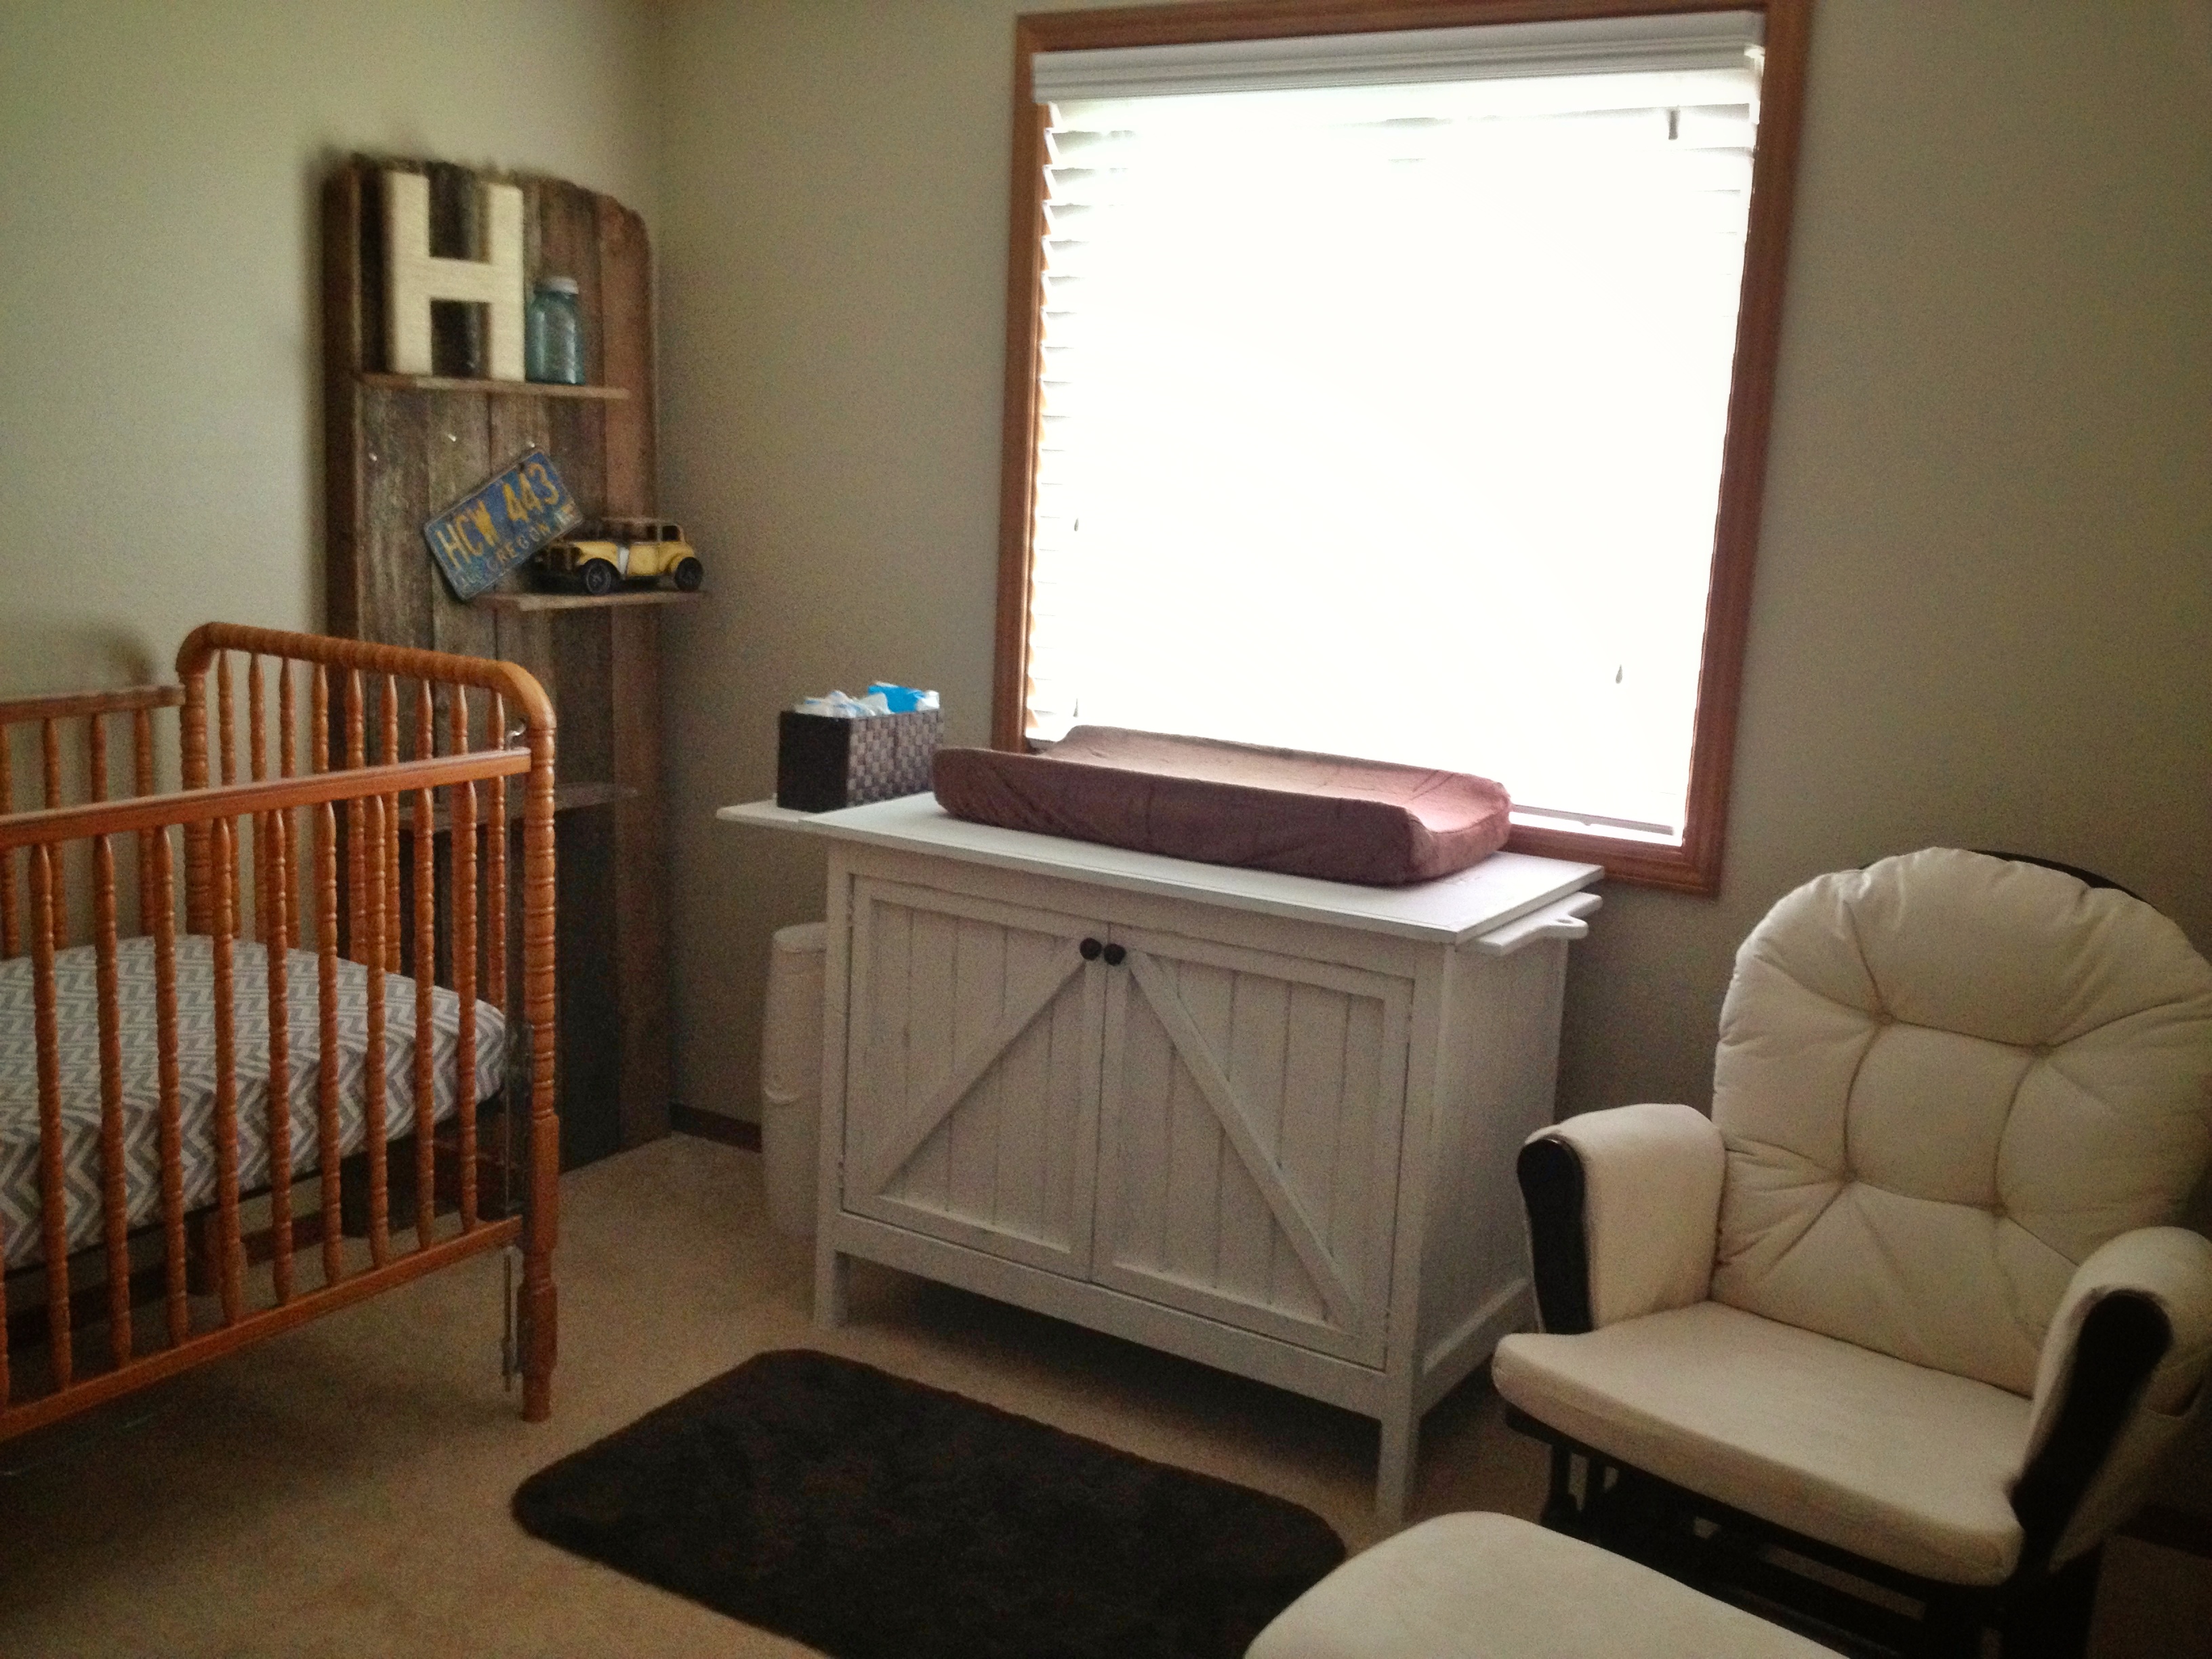 rustic grey changing table